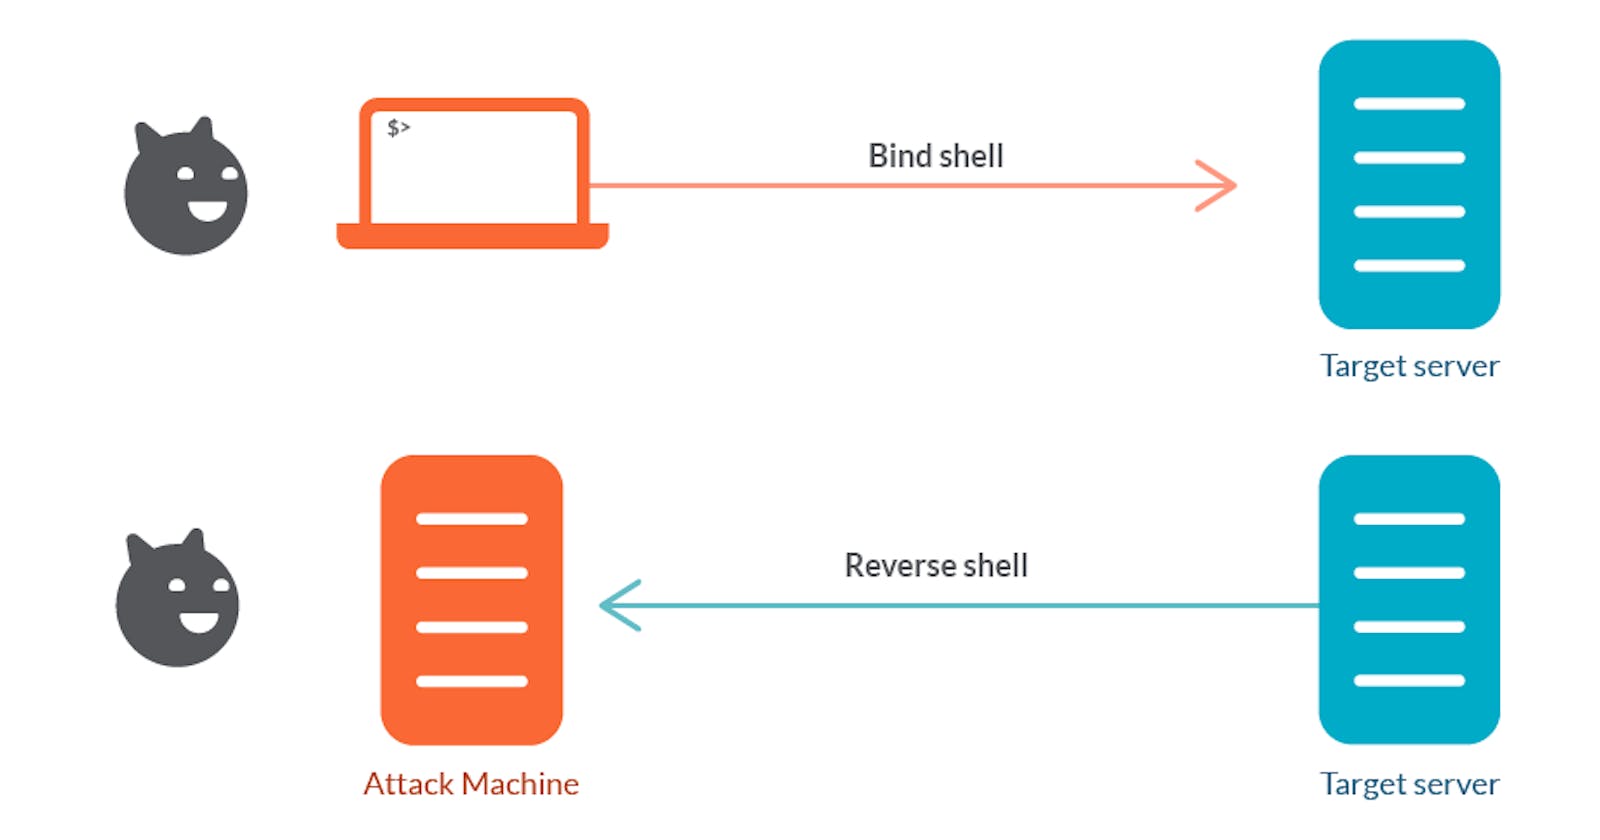 Bind and Reverse Shells